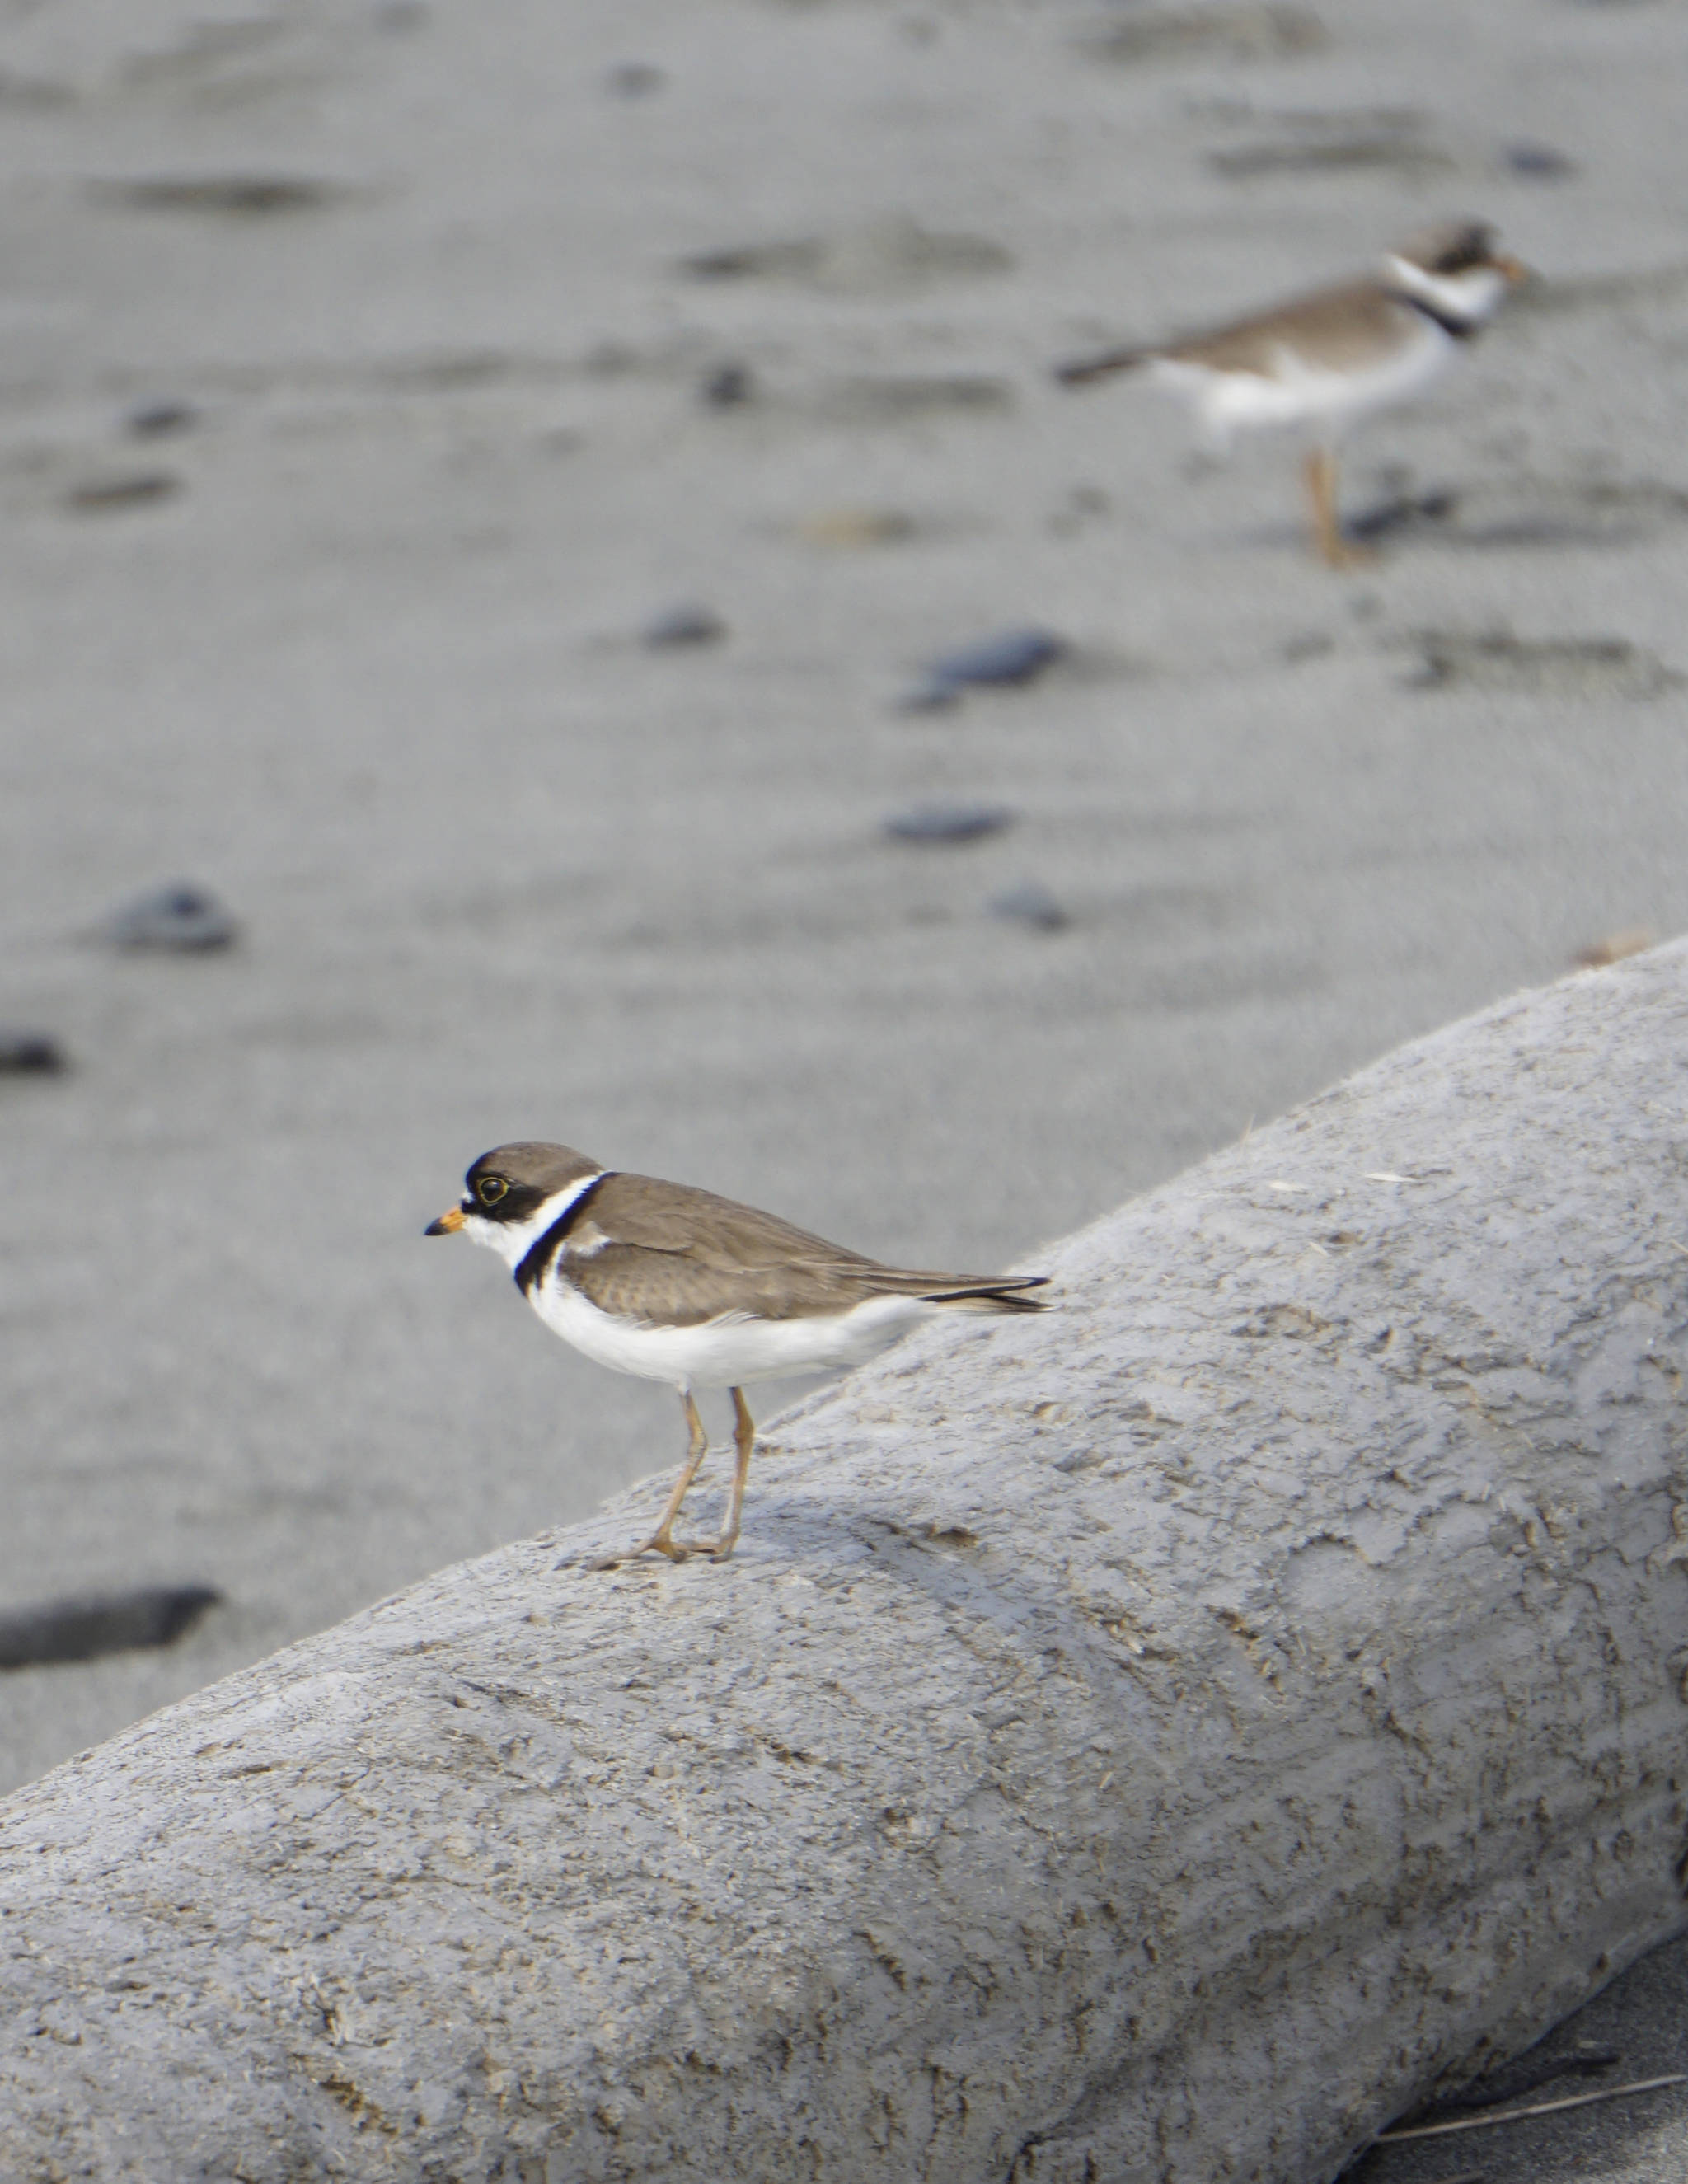 Semipalmated plovers rest on the beach of Discovery Campground in Capt. Cook State Park on June 21, 2019, near Nikiski, Alaska. (Photo by Michael Armstrong/Homer News)